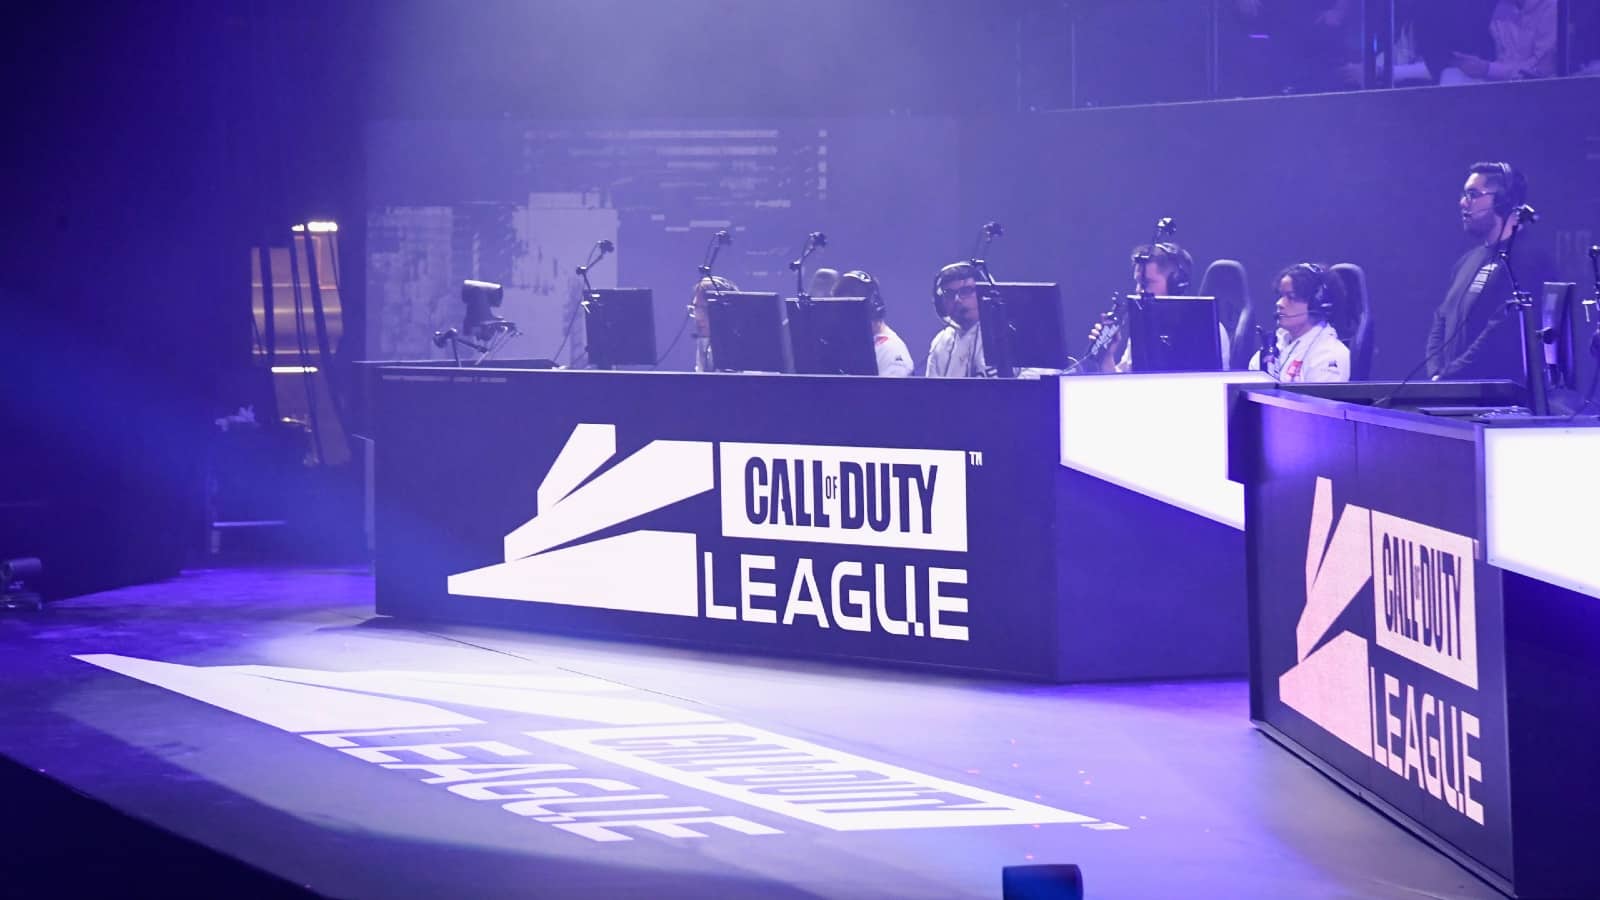 Call of Duty League Rankings: Ranking the Top Teams